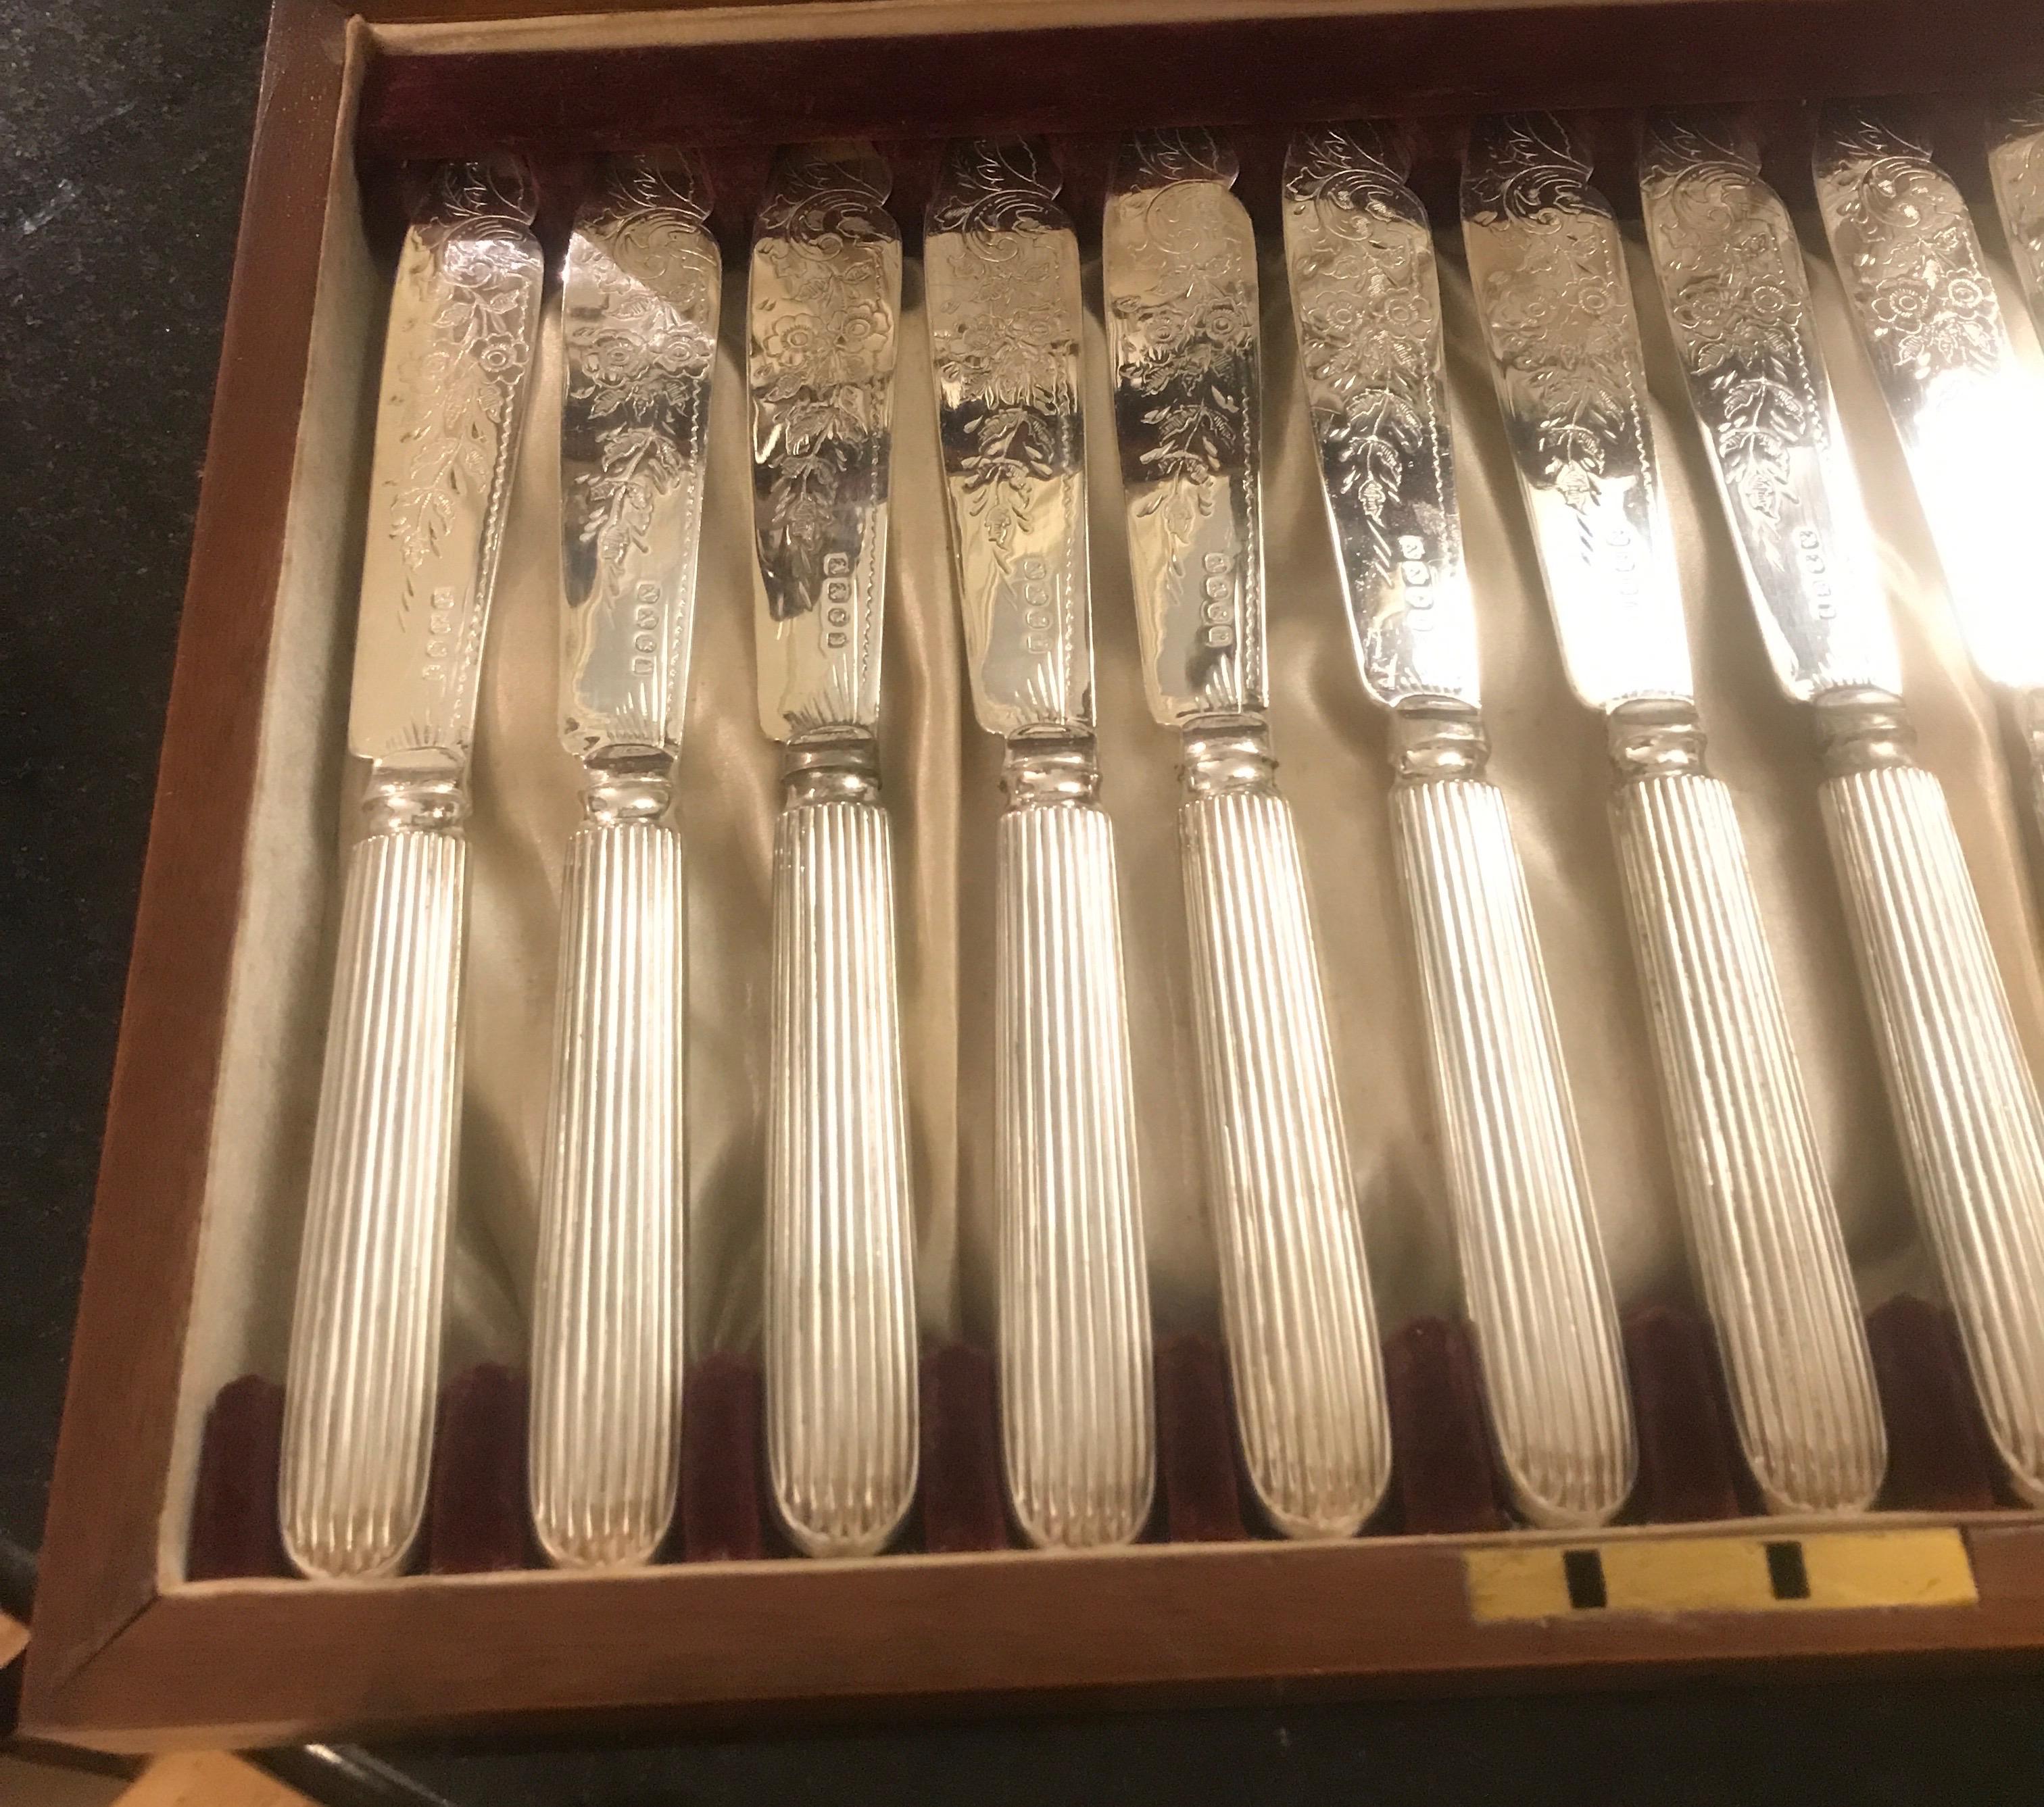 Elegant English Sheffield plate fish service for 12. The set in excellent condition with original storage box with silk satin lining. The set with delicate engraved design on the knife blades and showing the full set of English hallmarks.